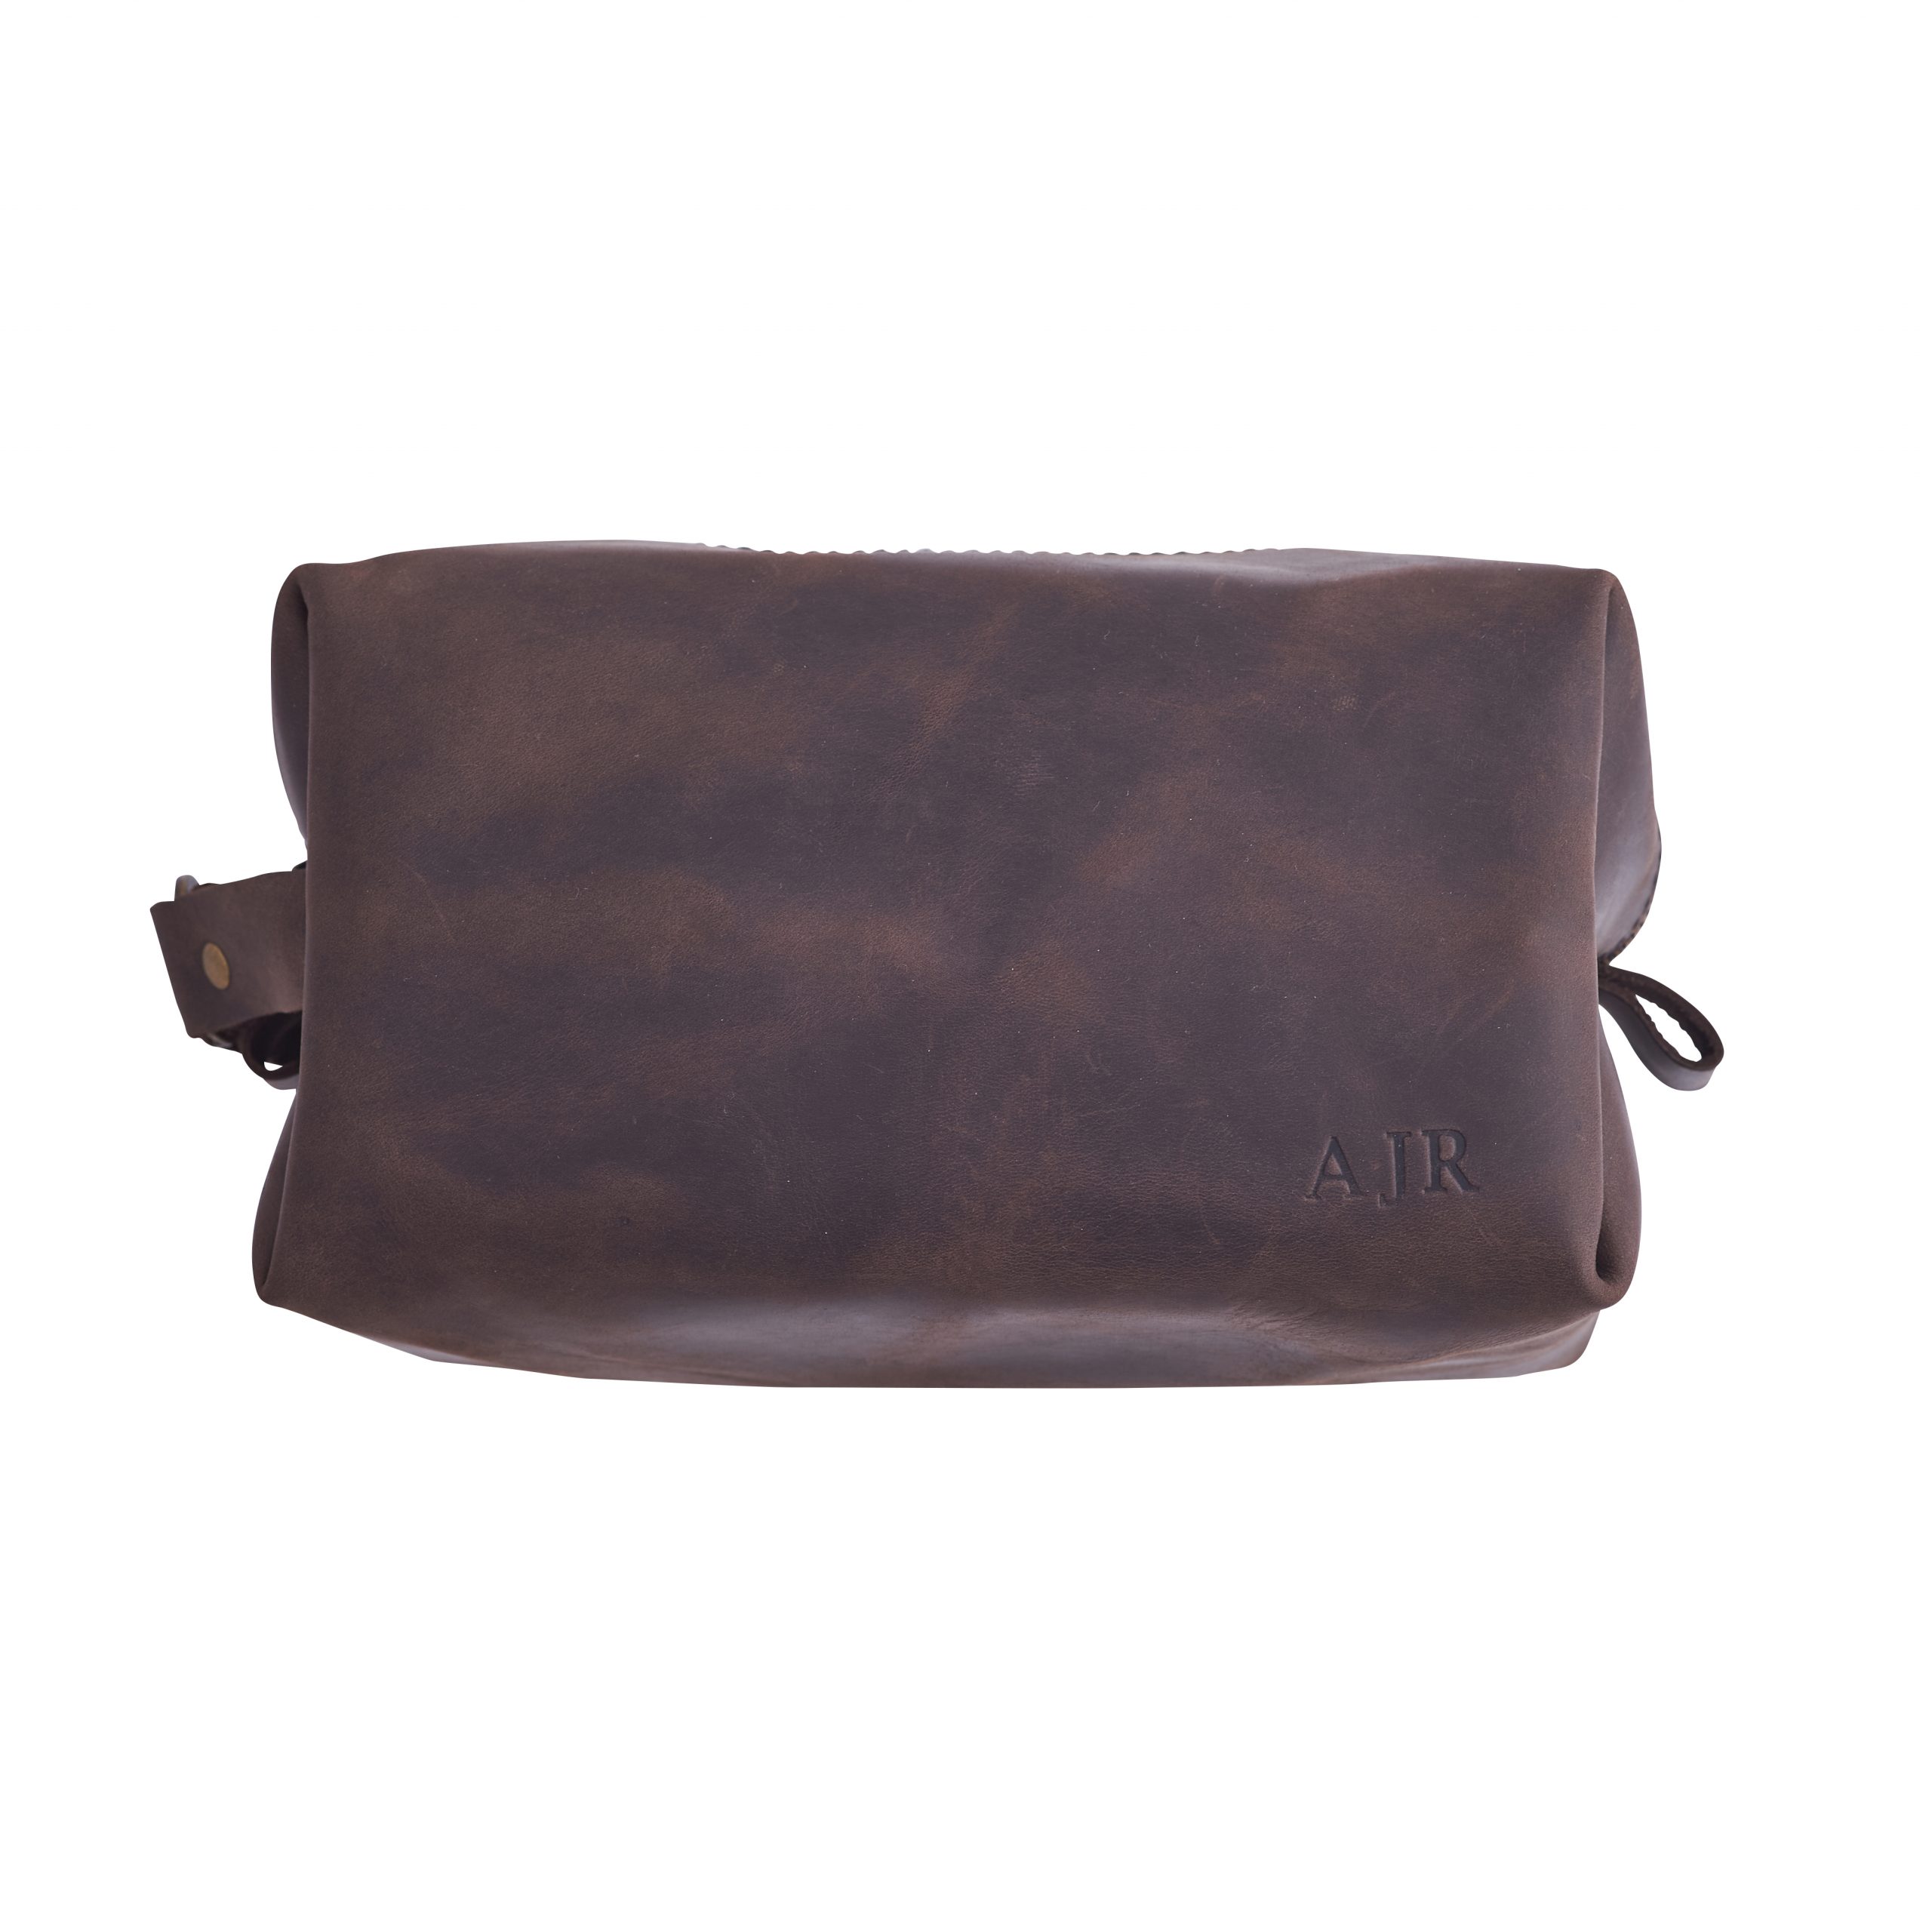 personalised-brown-real-leather-mens-toiletry-wash-bag-dopp-kit-travel-bag-gifts-for-him